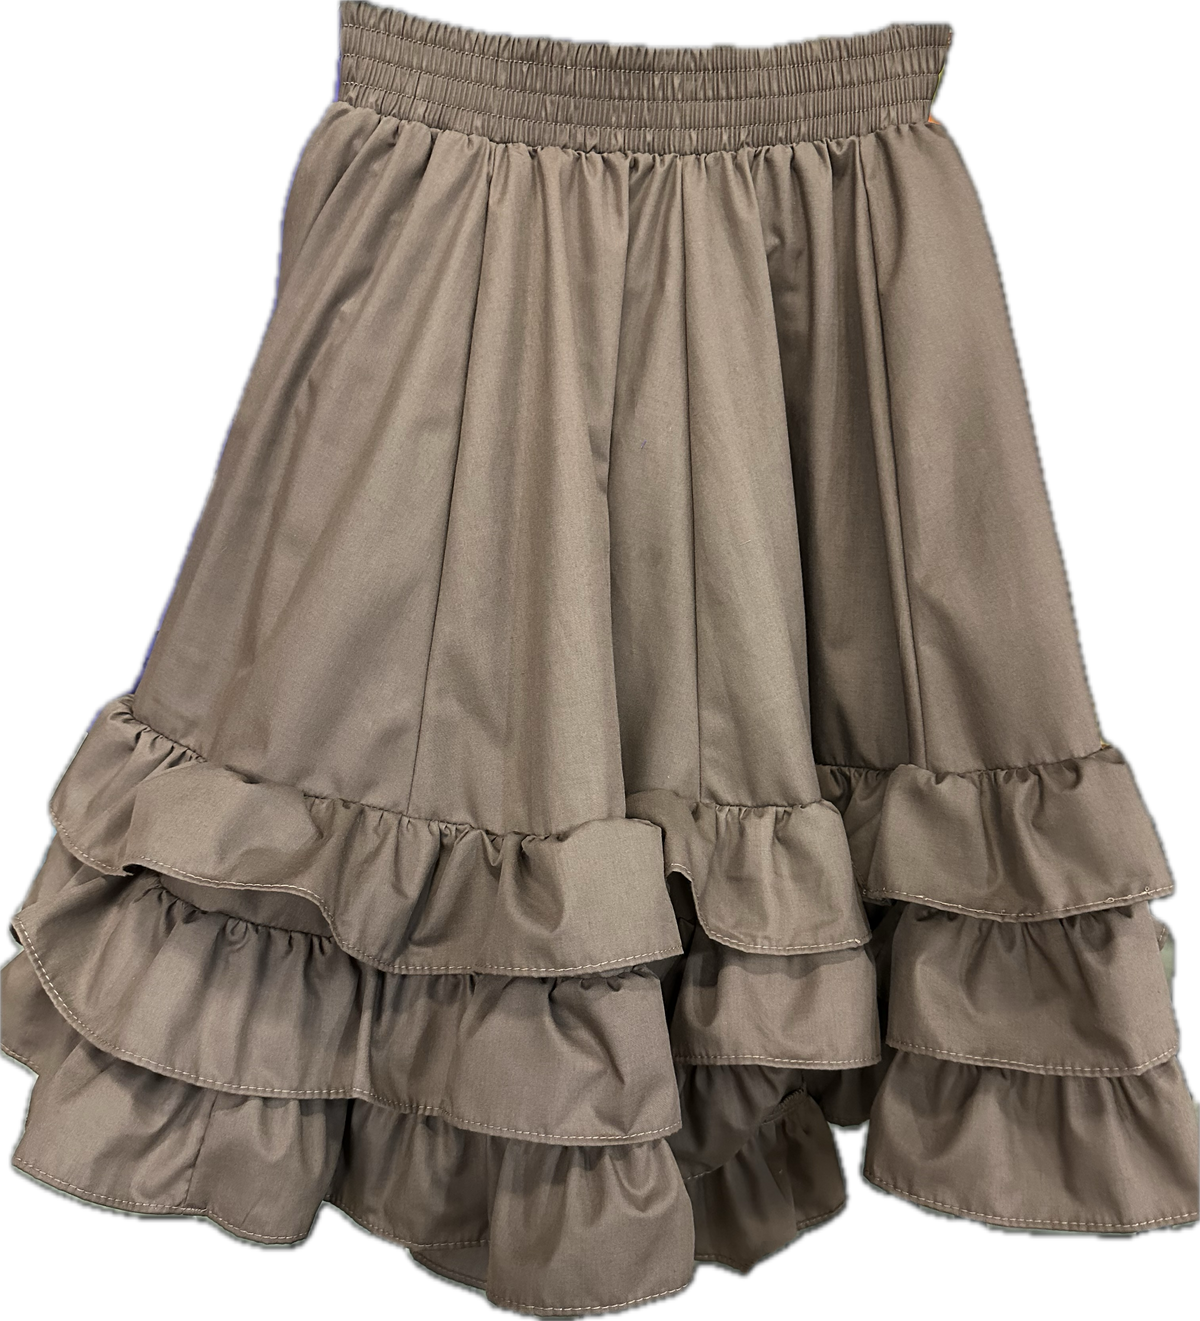 A solid 3 Ruffle Square Dance Skirt in grey, custom sizes available from Square Up Fashions.